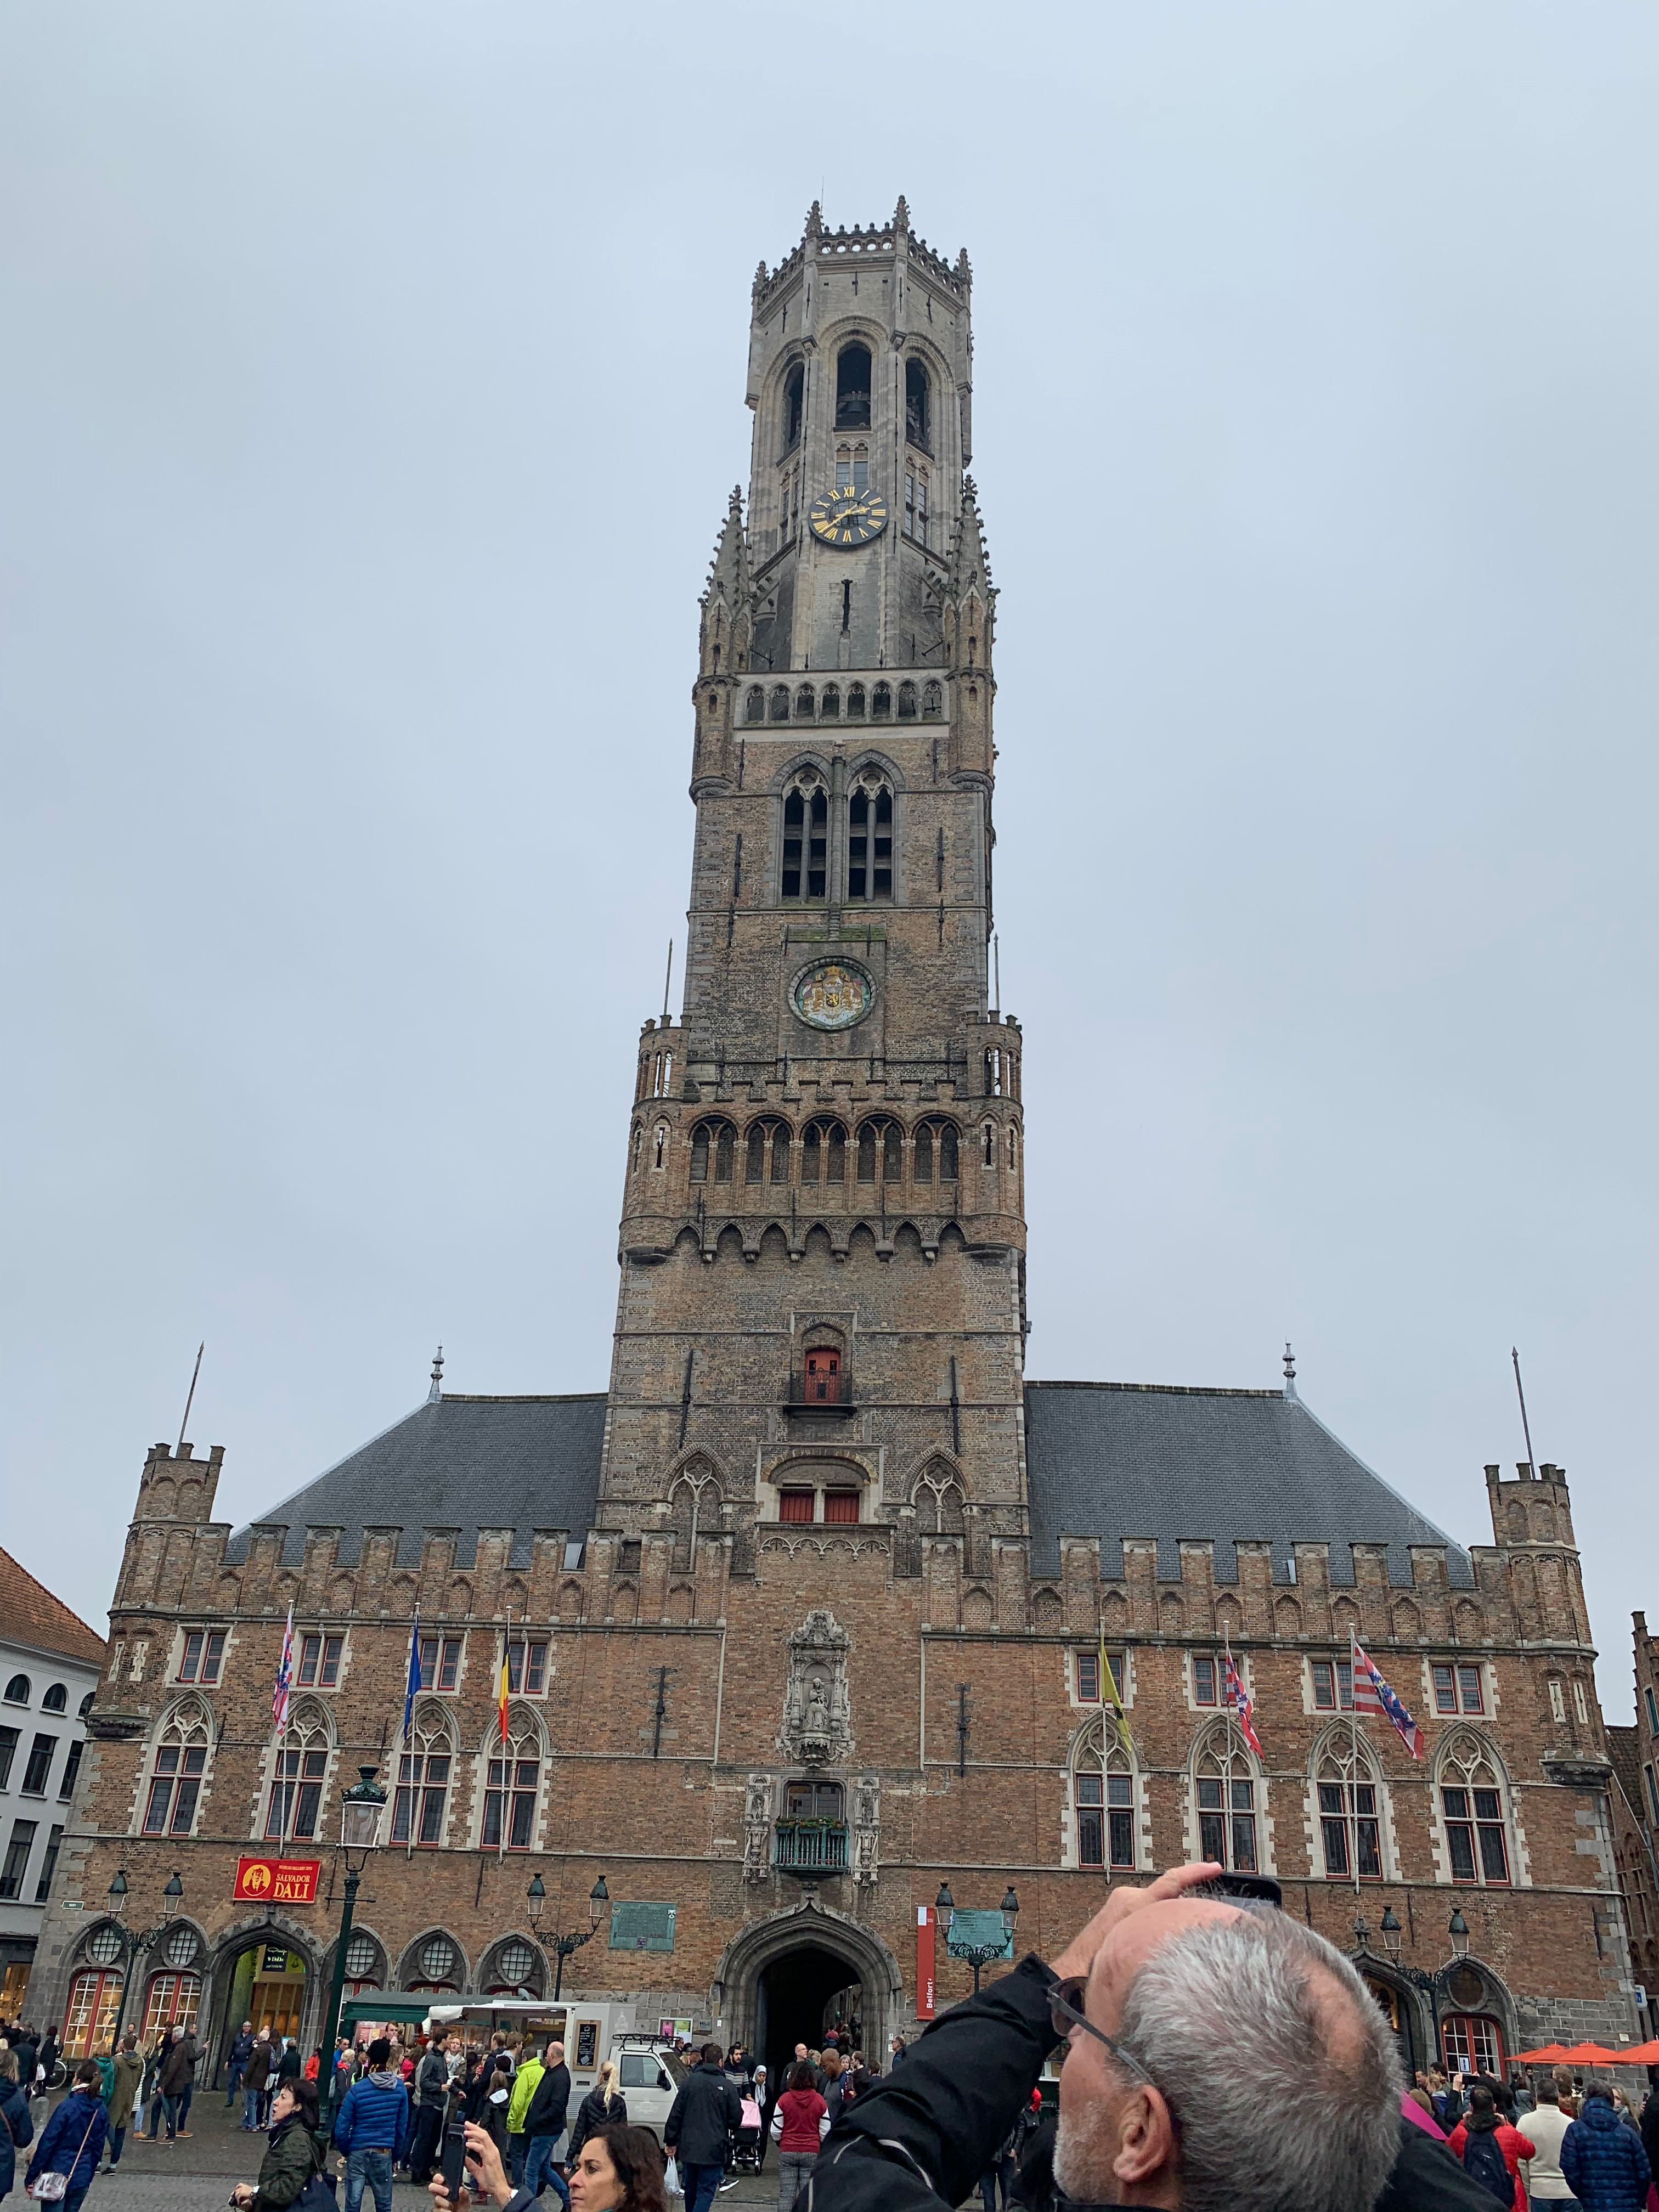 Large and tall clock tower in the Grote Markt in Bruges. It is a tall dark brown/grey brick tower. The top part is octagonal in design with a small clock. The lower parts of the tower is of square design and has a crest. The lower part of the building is a more red/brown brick. There are many people in the square in front of the tower